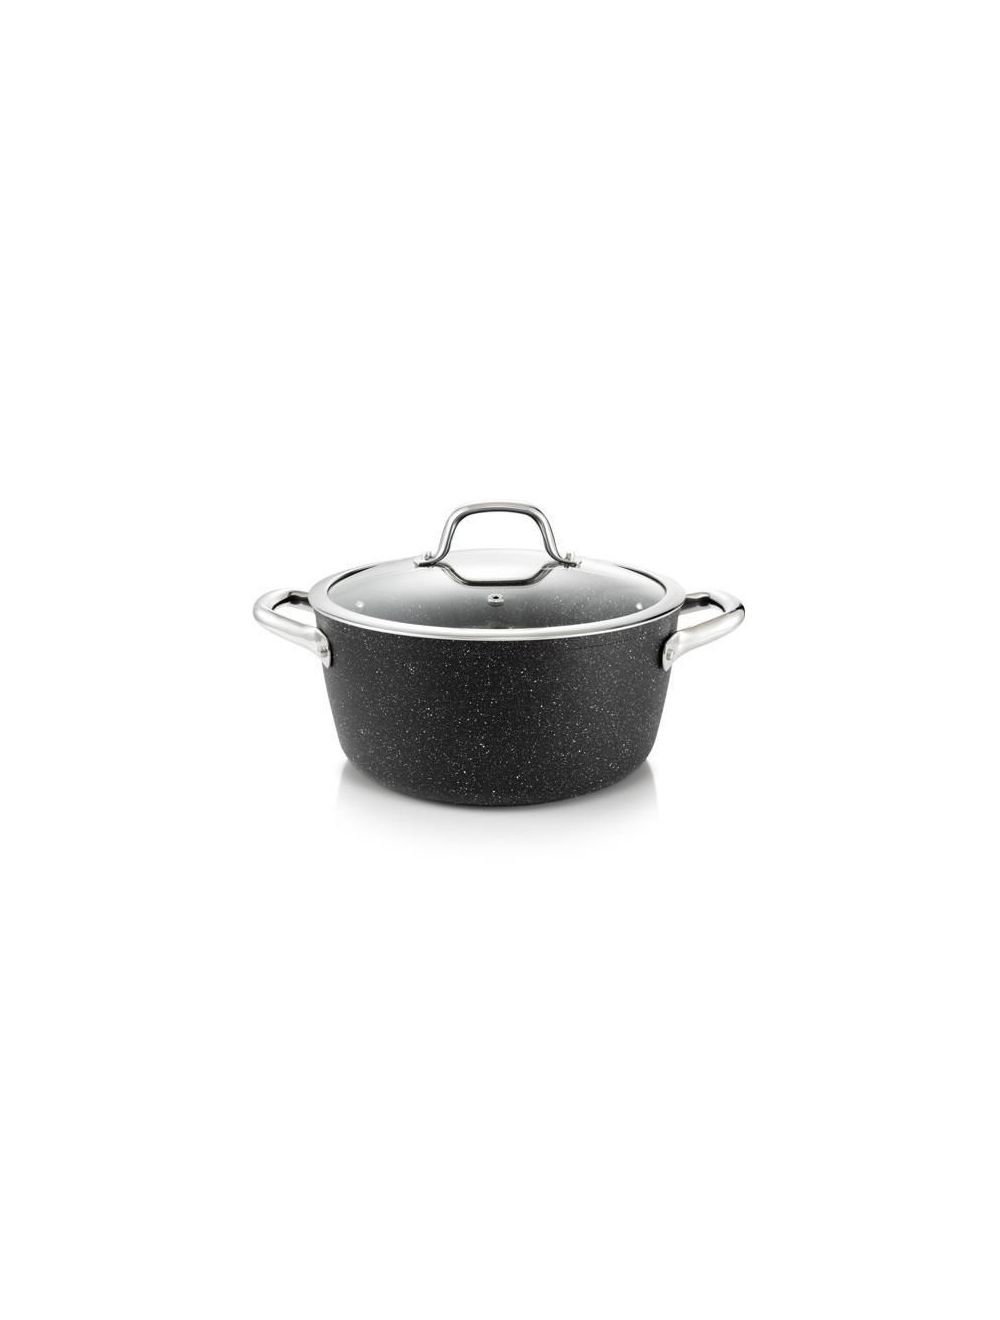 Tescoma President Stone 4.5 Litres Casserole/Cooking Pot With Cover 24cm